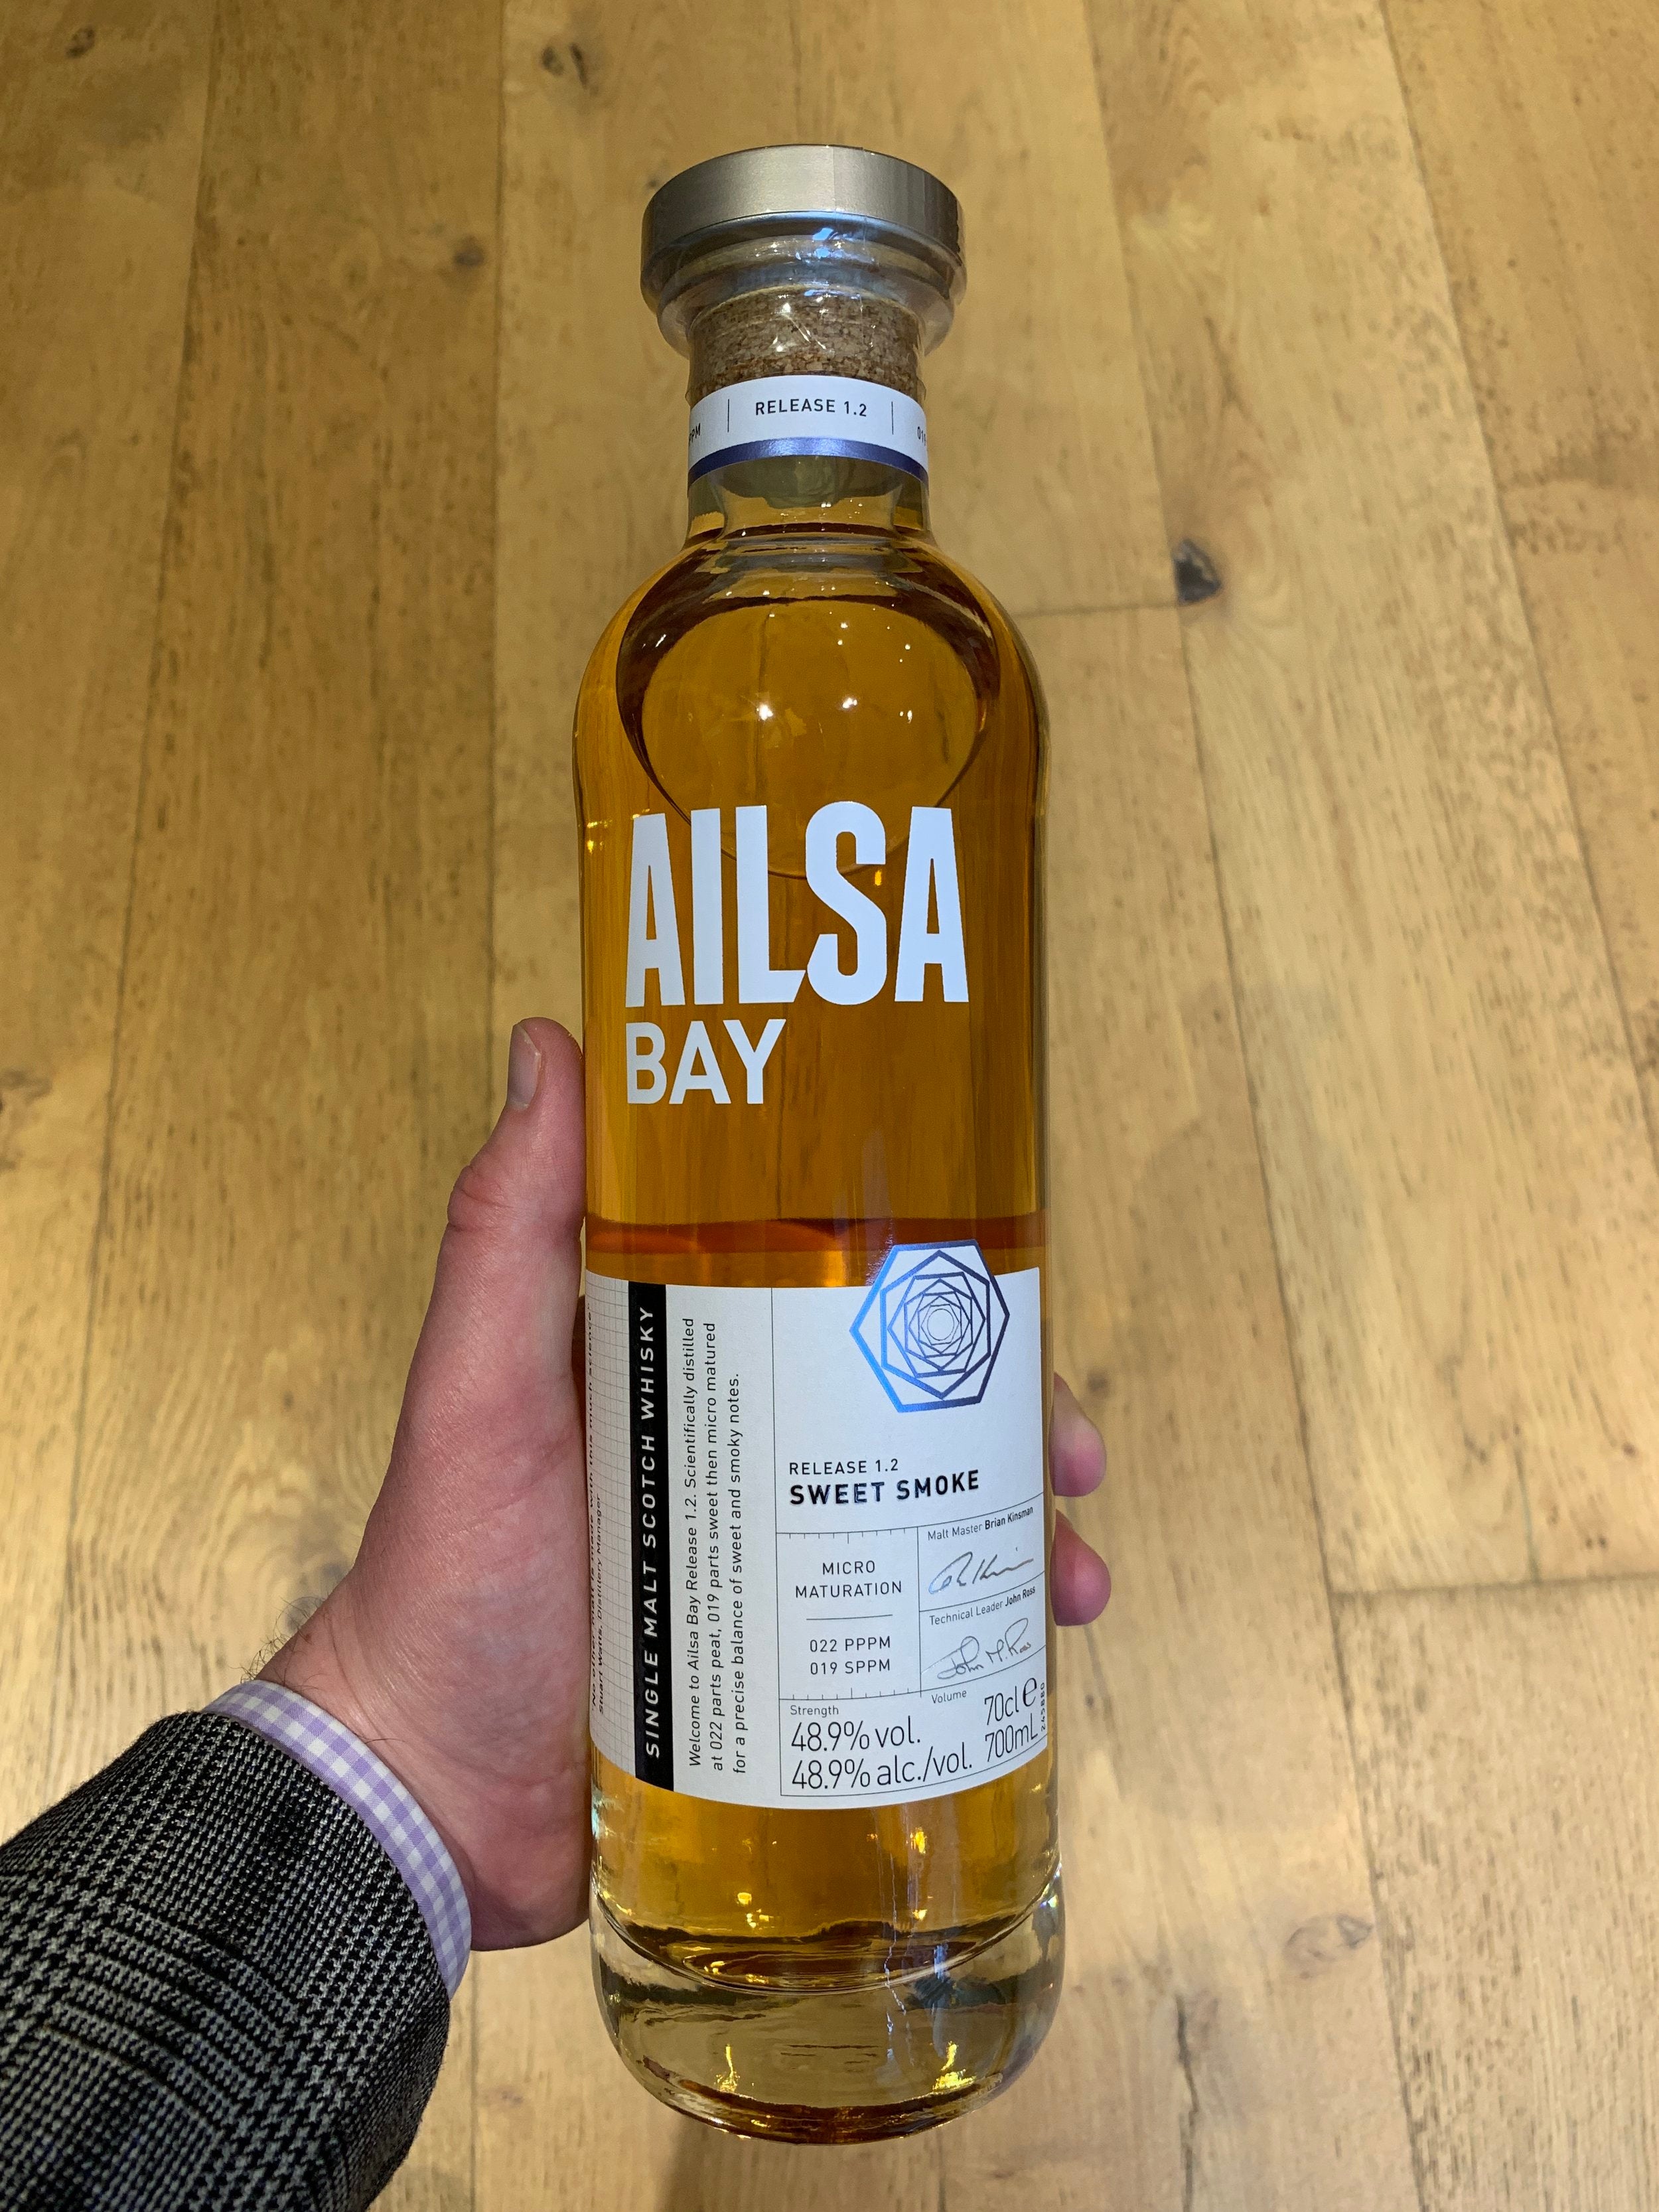 Ailsa Bay: The Most Scientific Scotch Whisky?